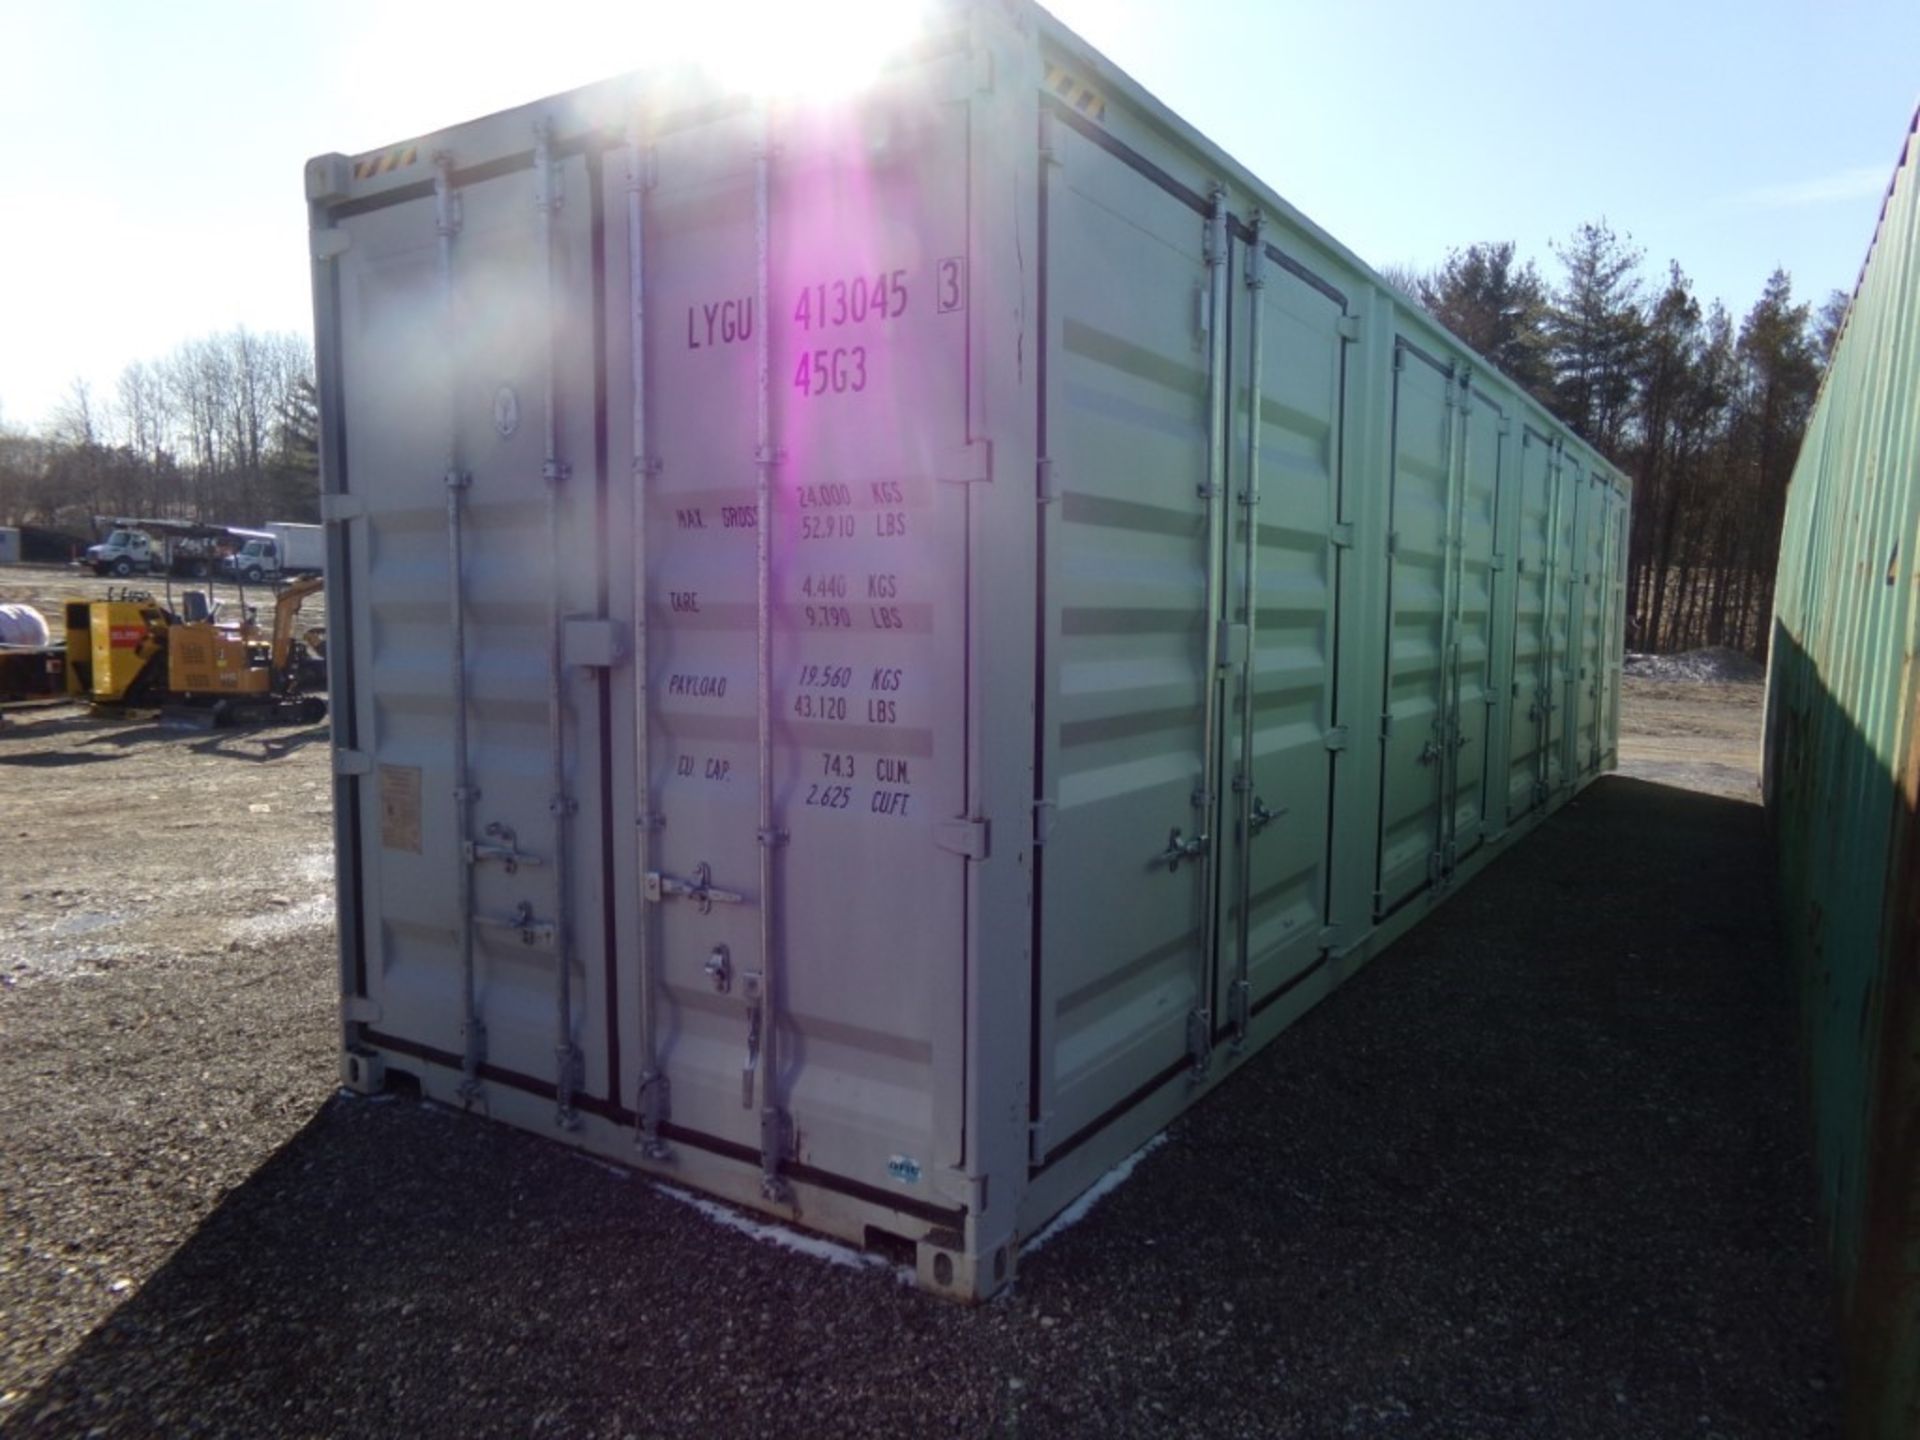 New 40' Storage Container 4 Side Access Doors, Barn Doors on 1 End, Cont#LYGU4130453 - Image 2 of 3